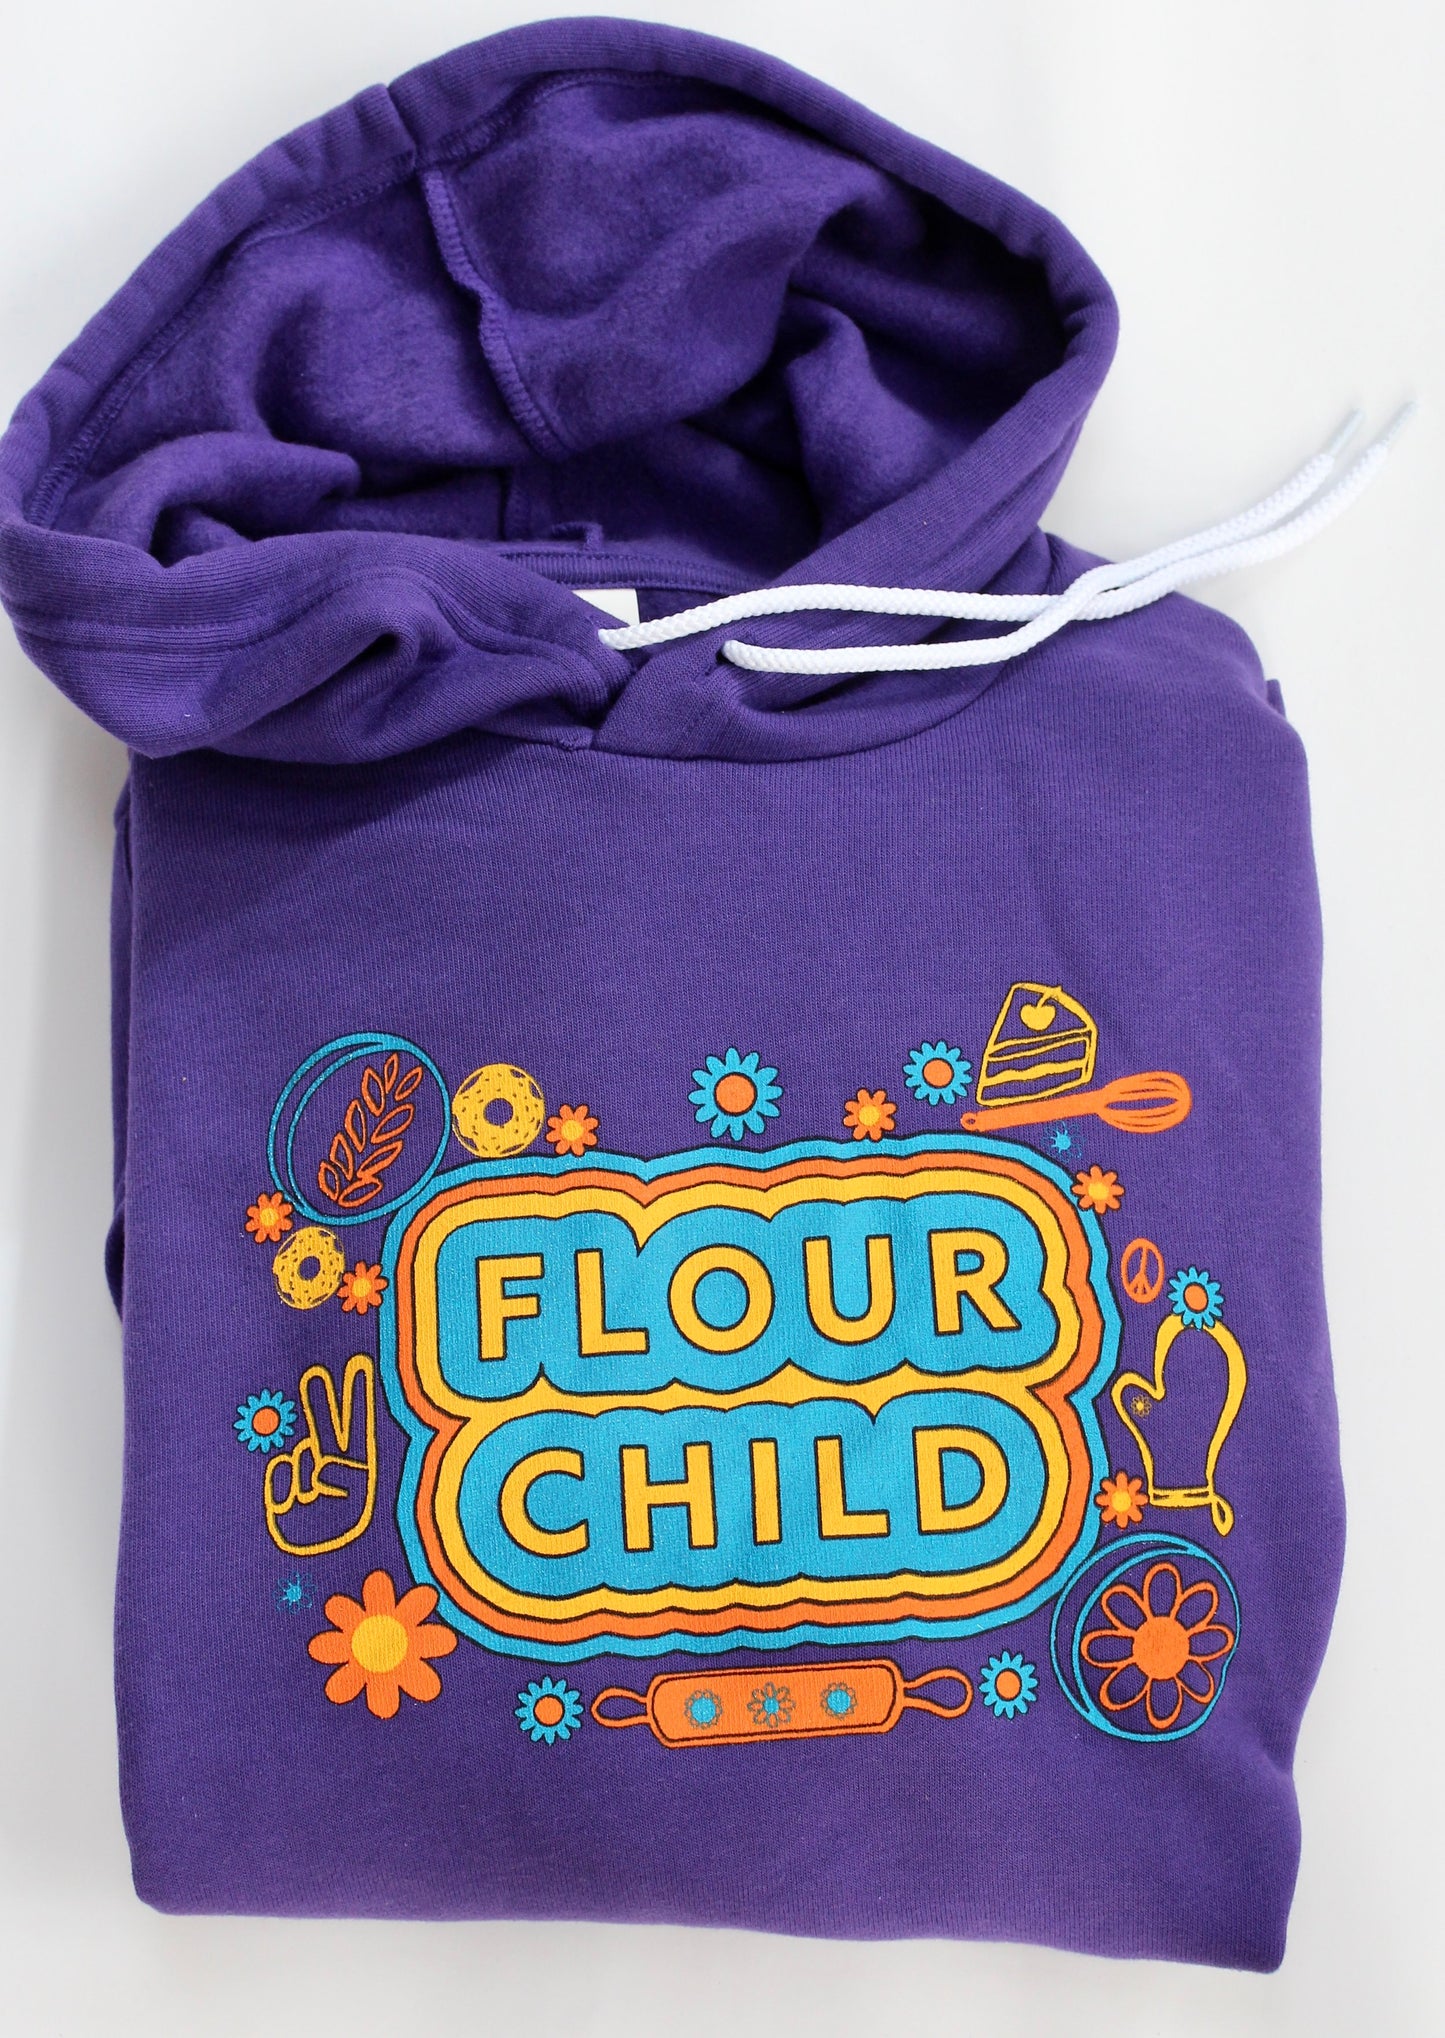 A folded purple hoodie with white drawcords and the words "Flour Child" with brightly colored accents and illustrations